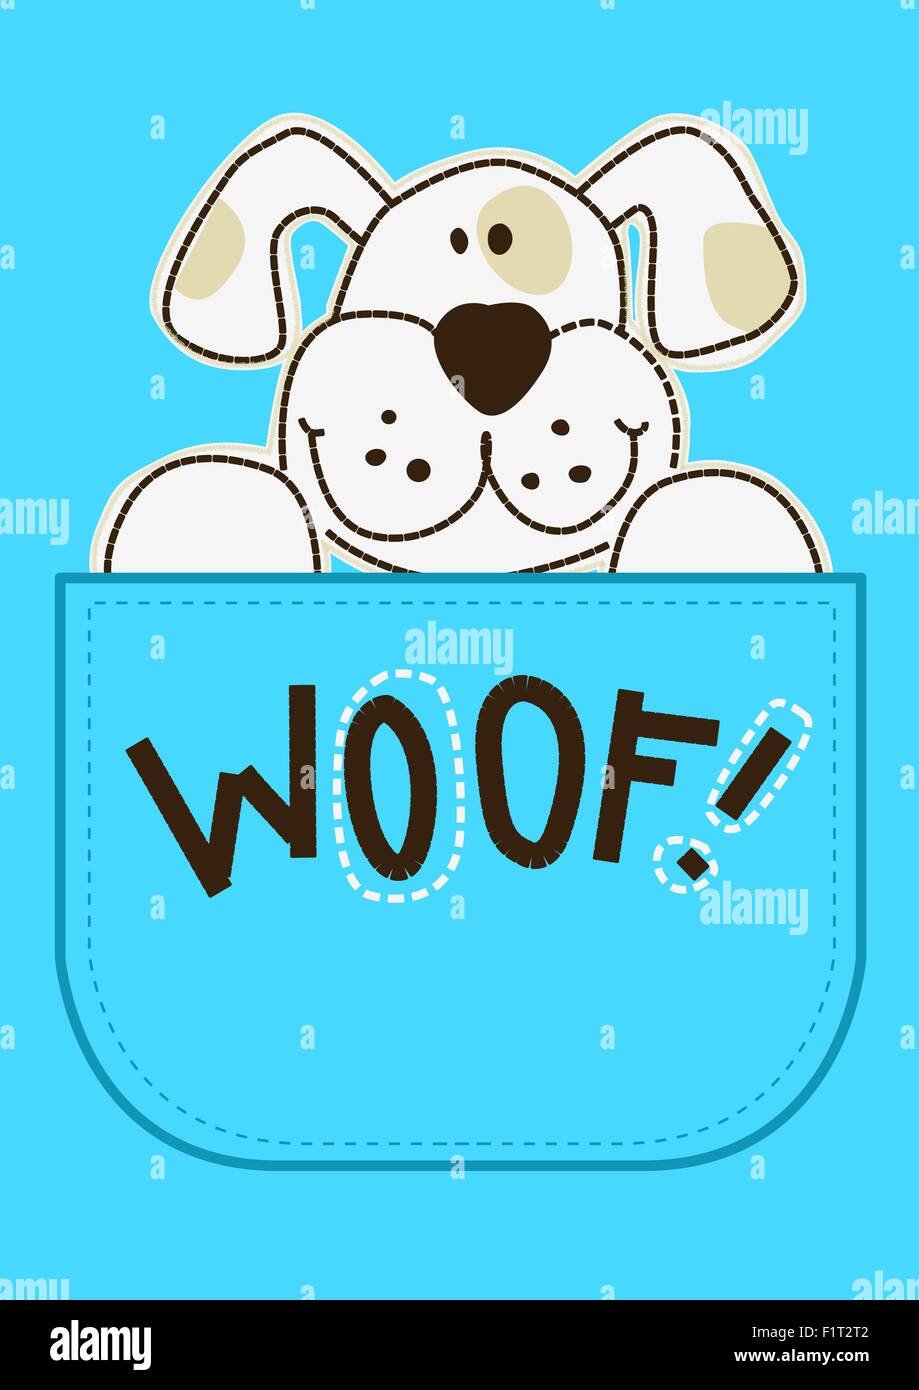 Woof Woof puppy dog sitting in a pocket. Stock Vector